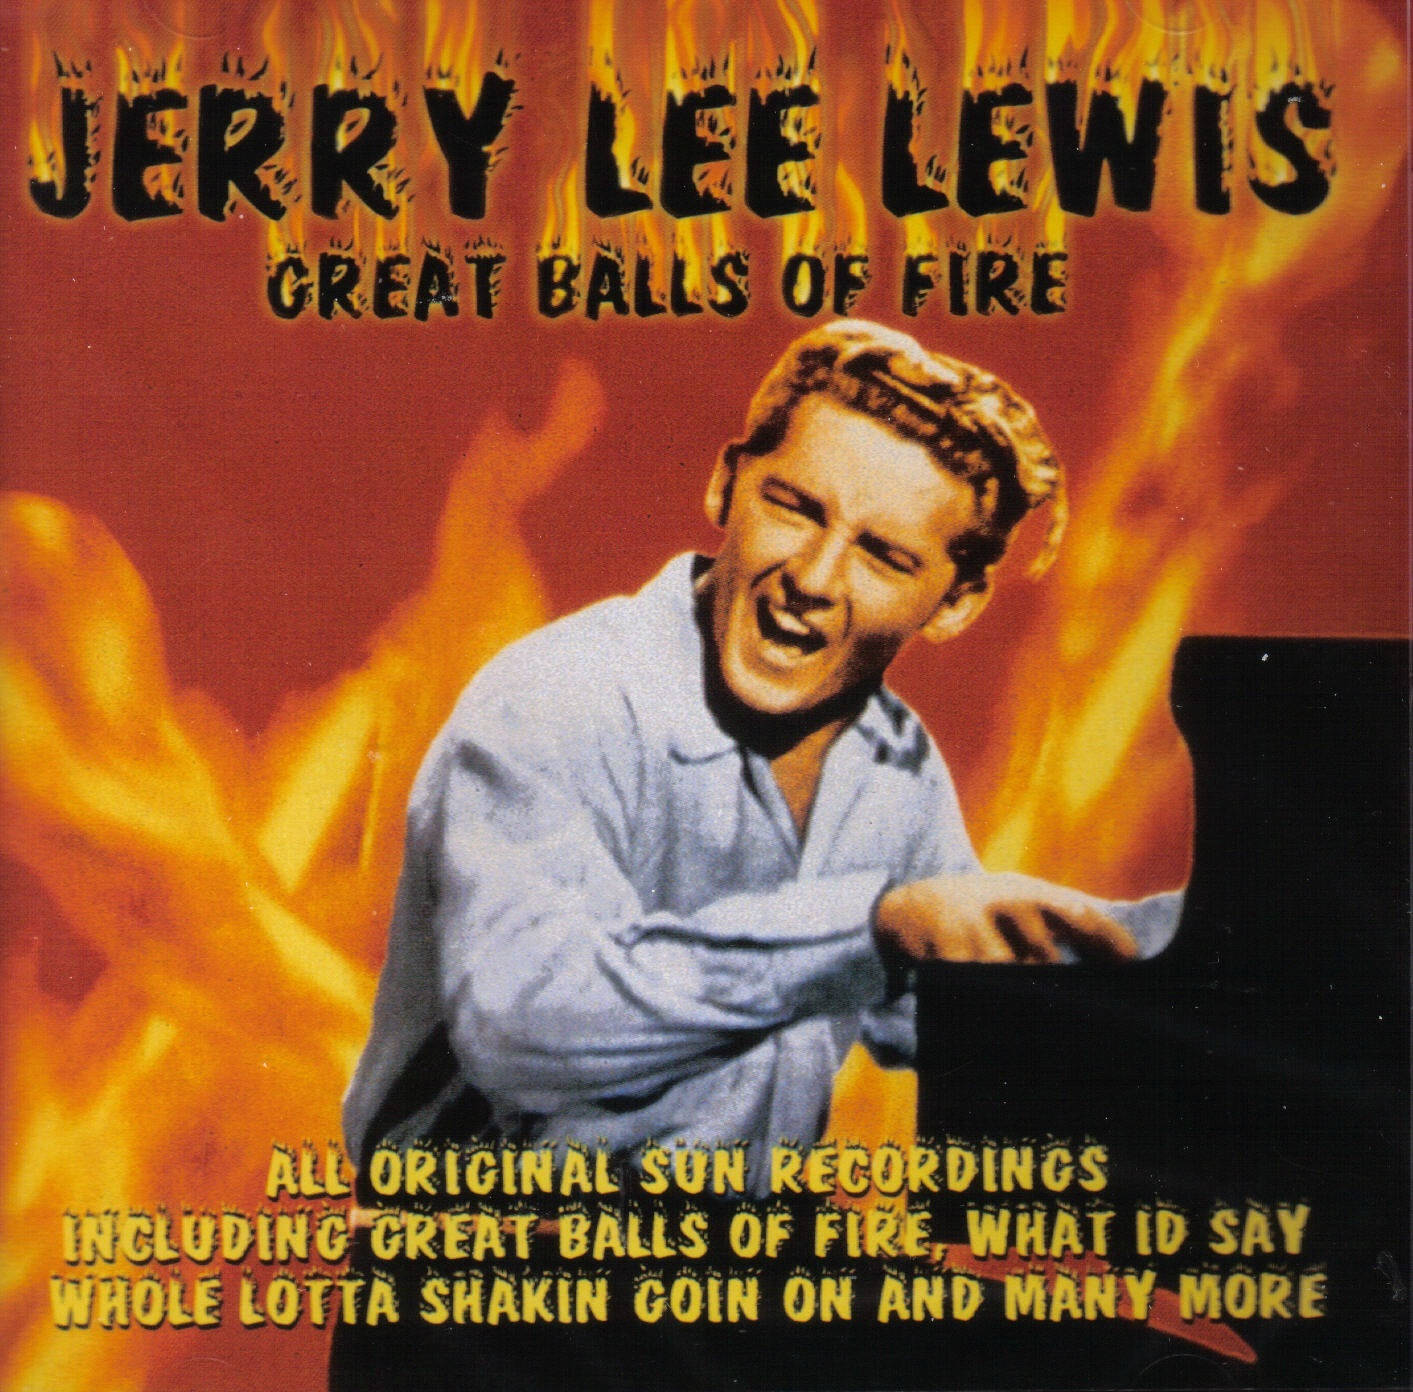 Fiery Jerry Lee Lewis Album Cover